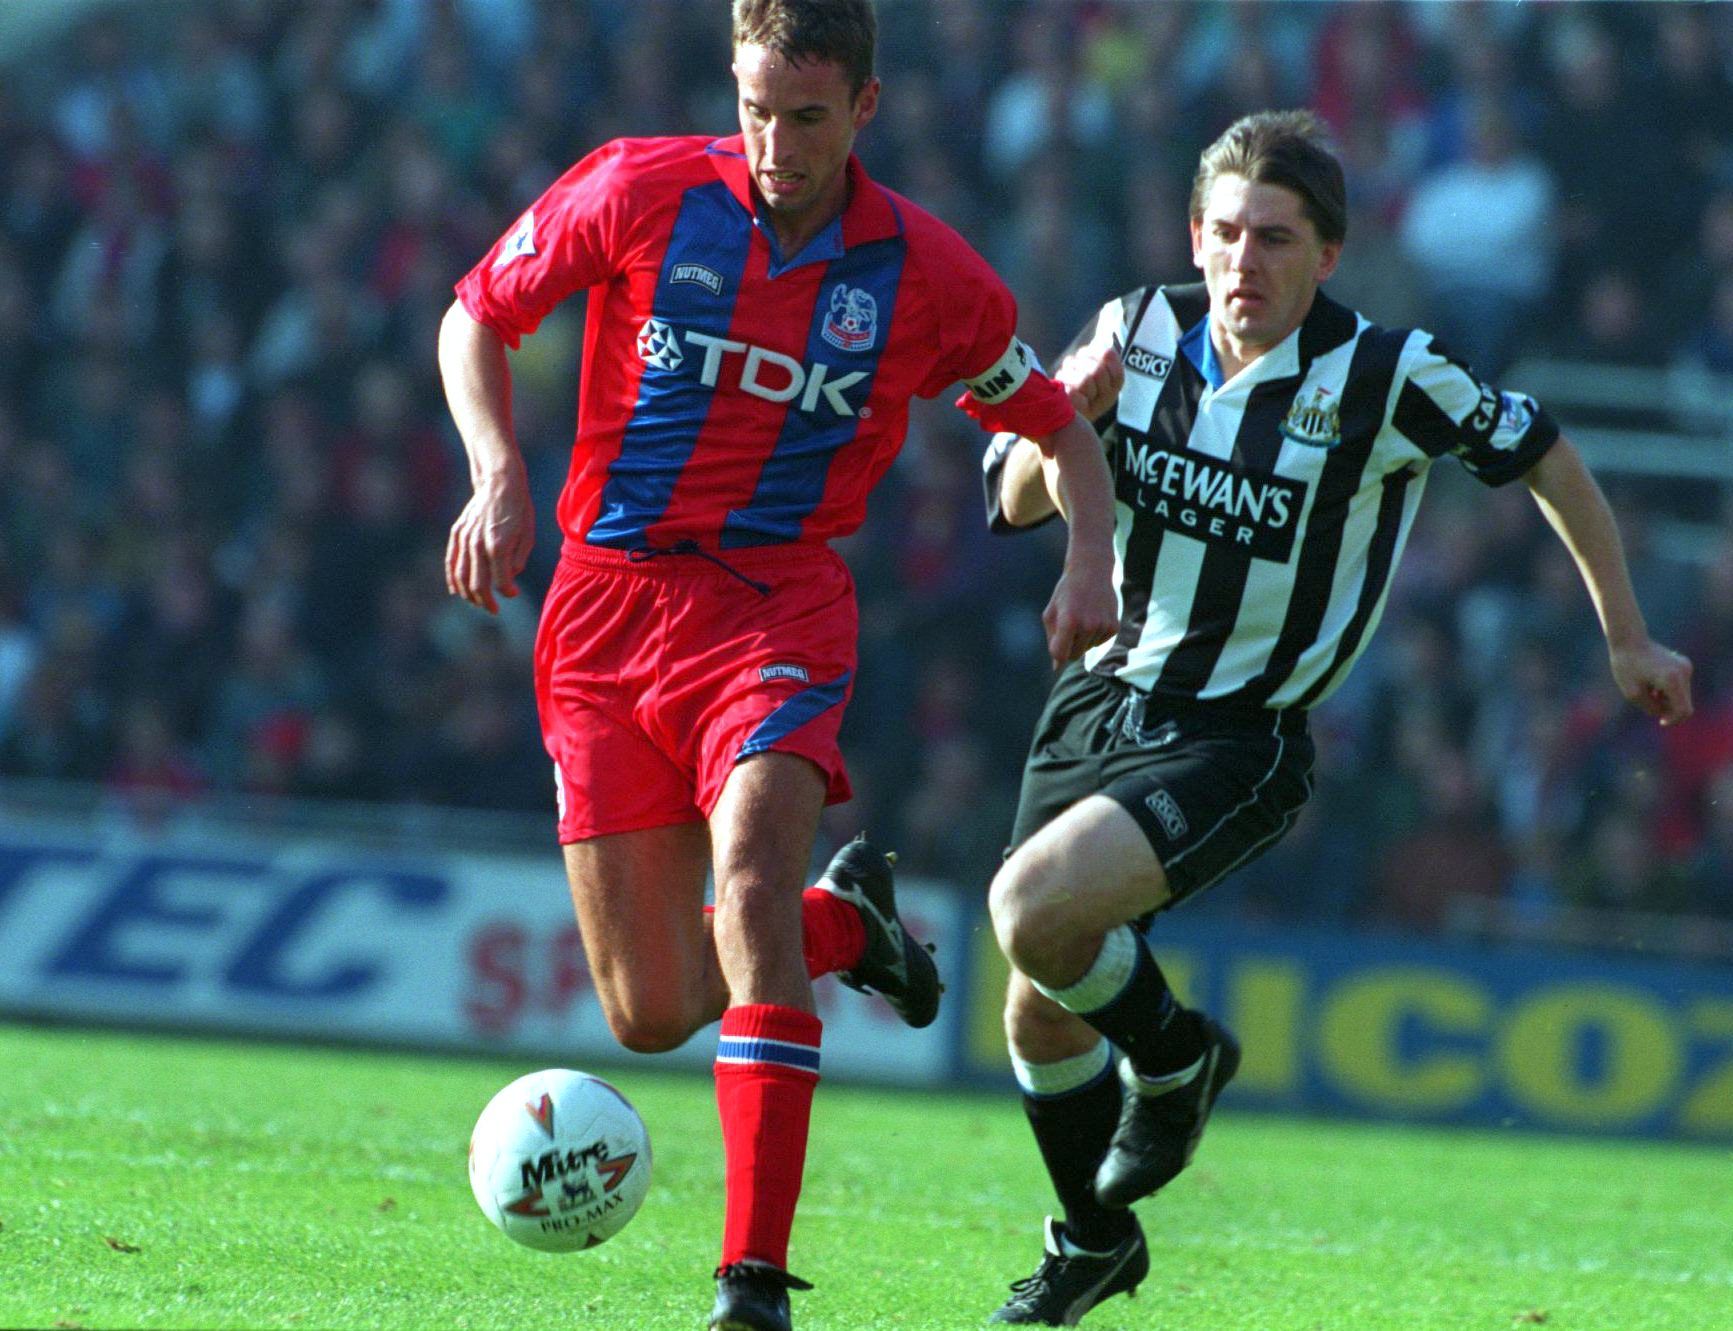 GARETH SOUTHGATE OF CRYSTAL PALACE IS PURSUED BY PETER BEARDSLEY OF NEWCASTLE UNITED.